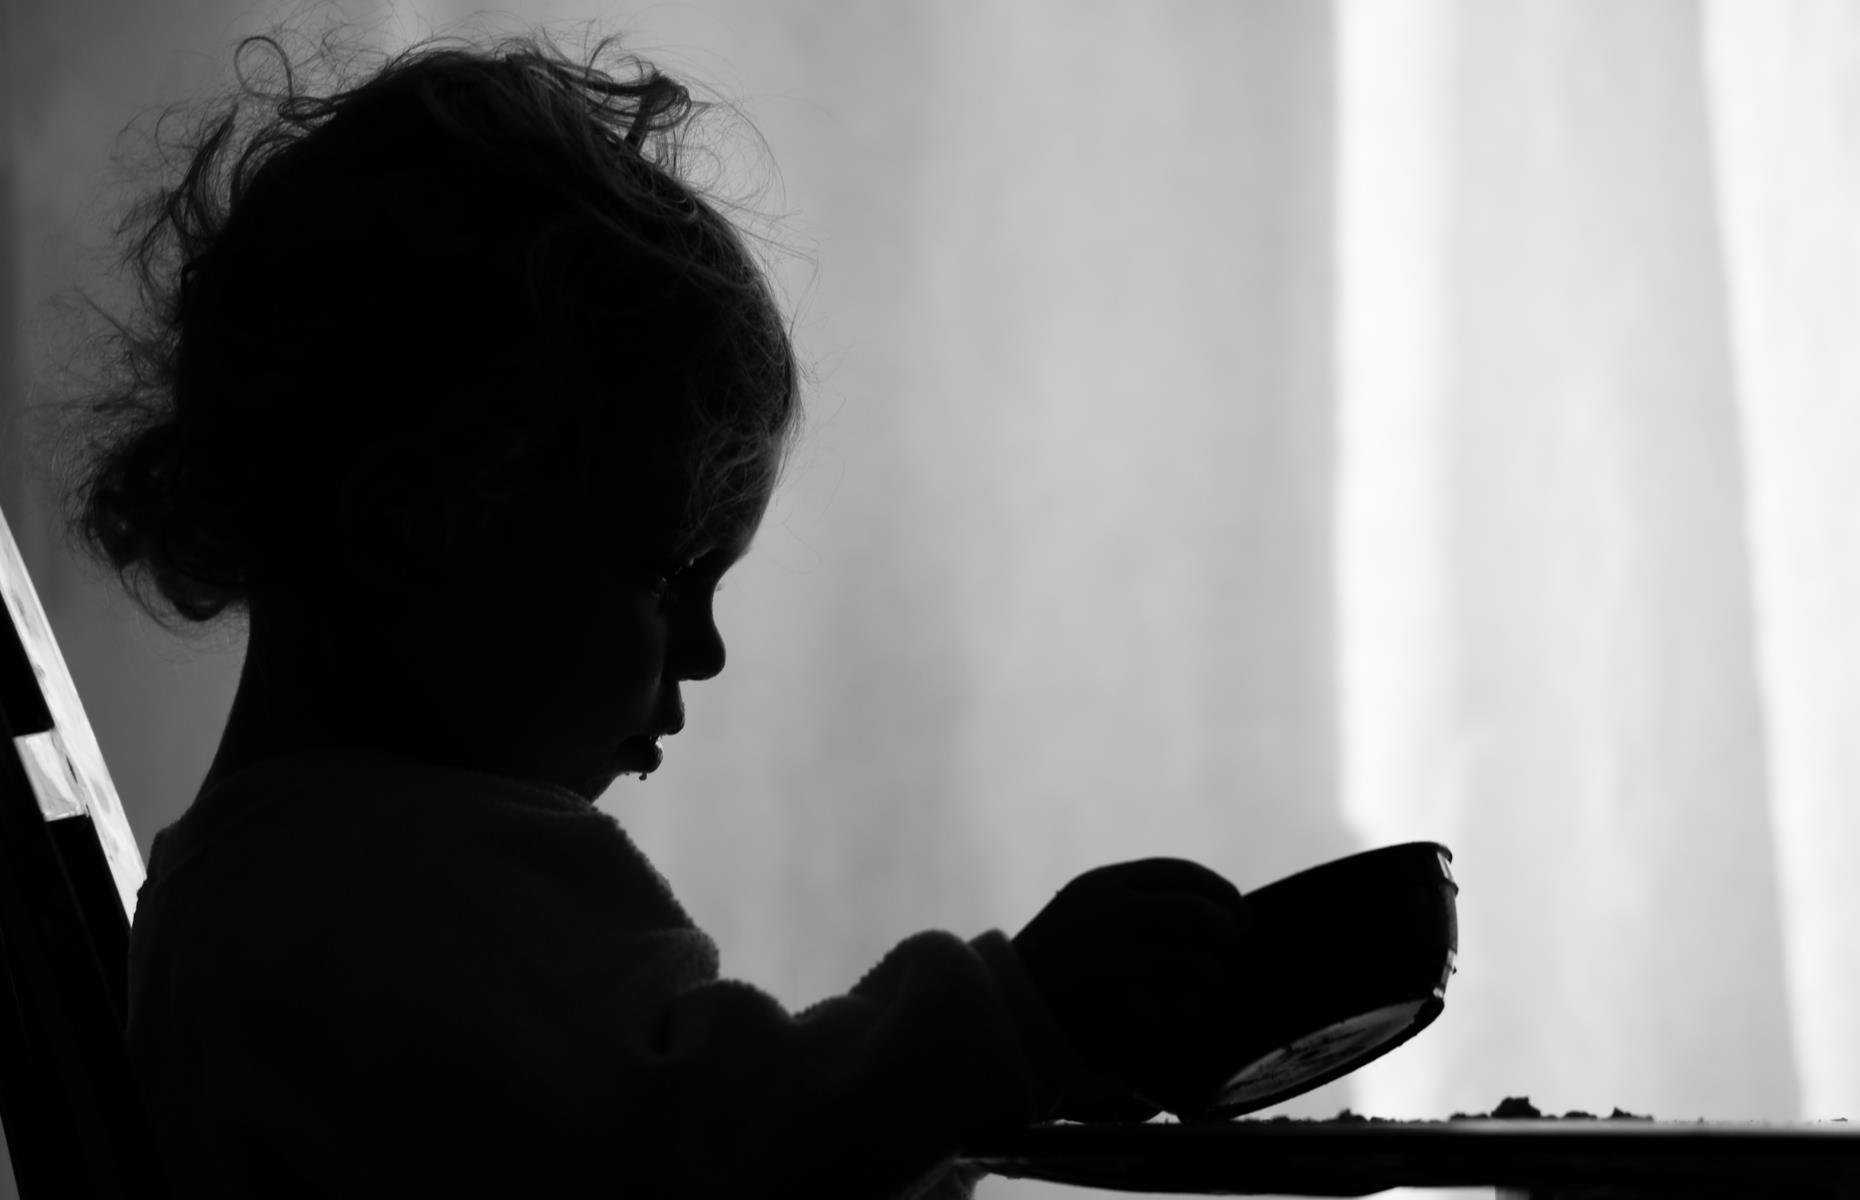 12.6 million American children are living in poverty